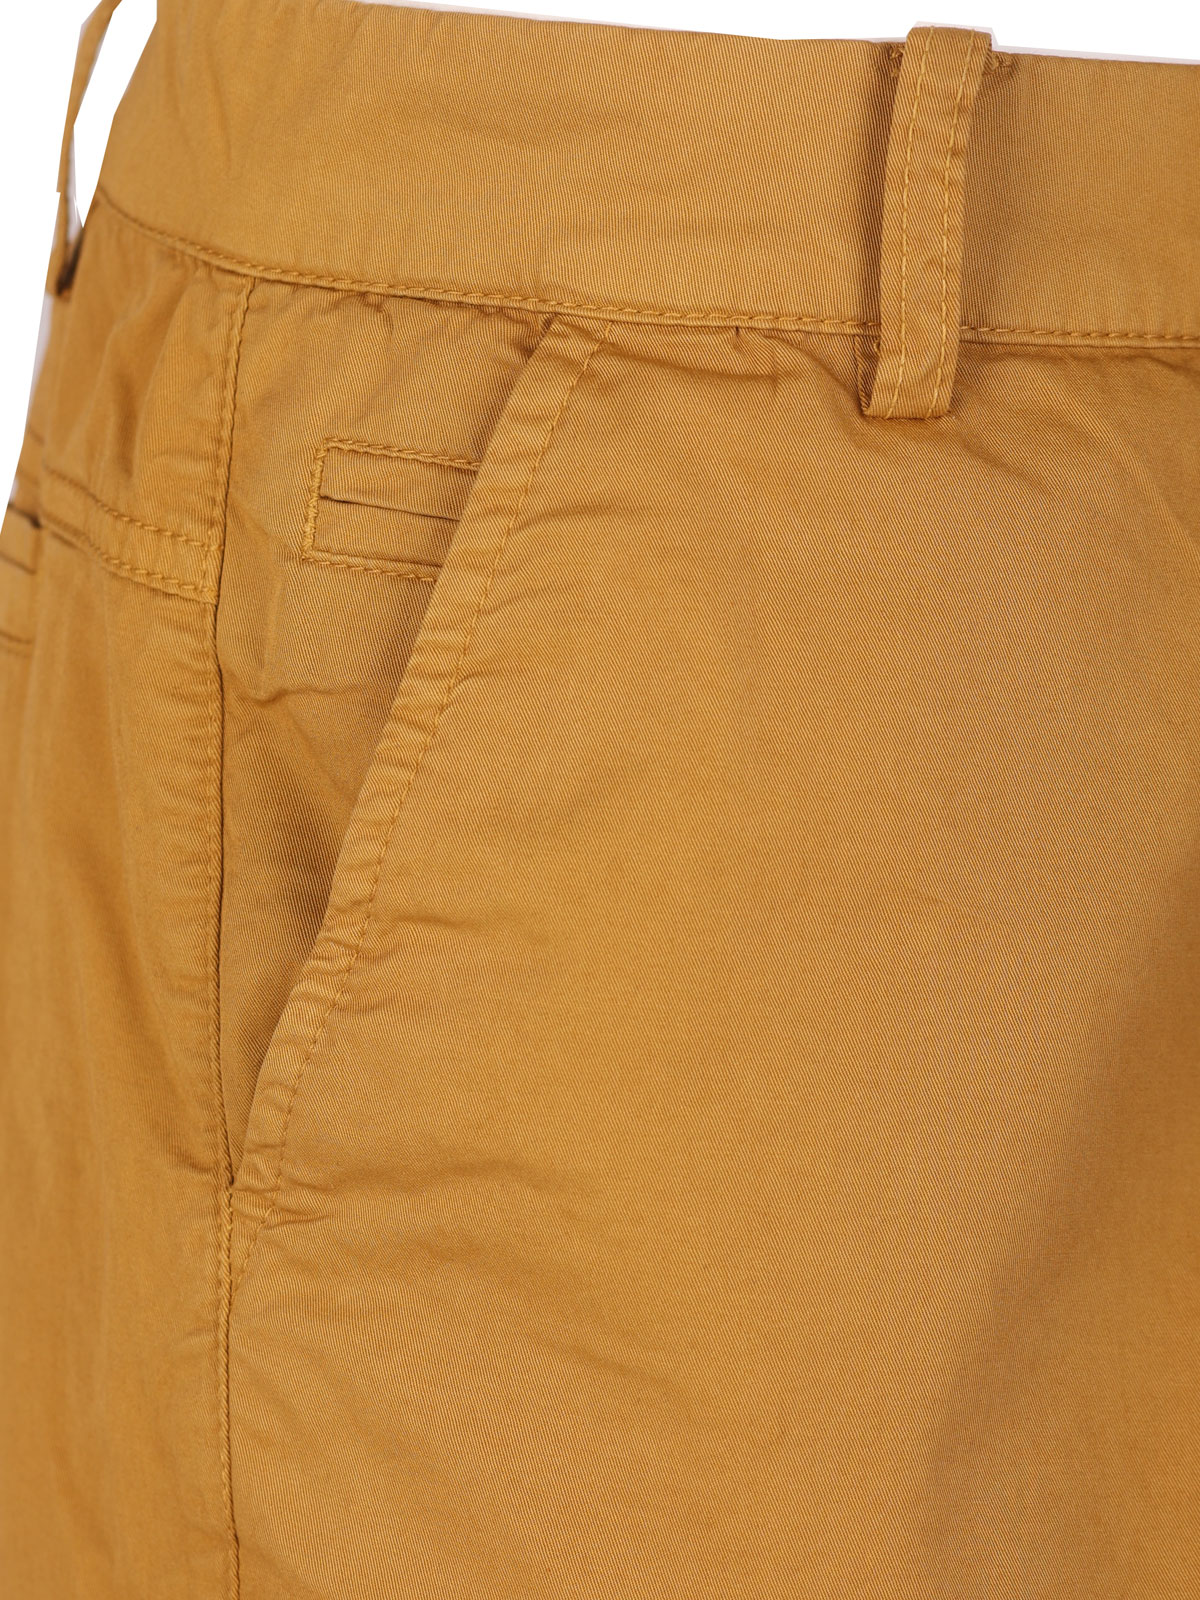 Short pants in mustard color - 67094 € 43.87 img2